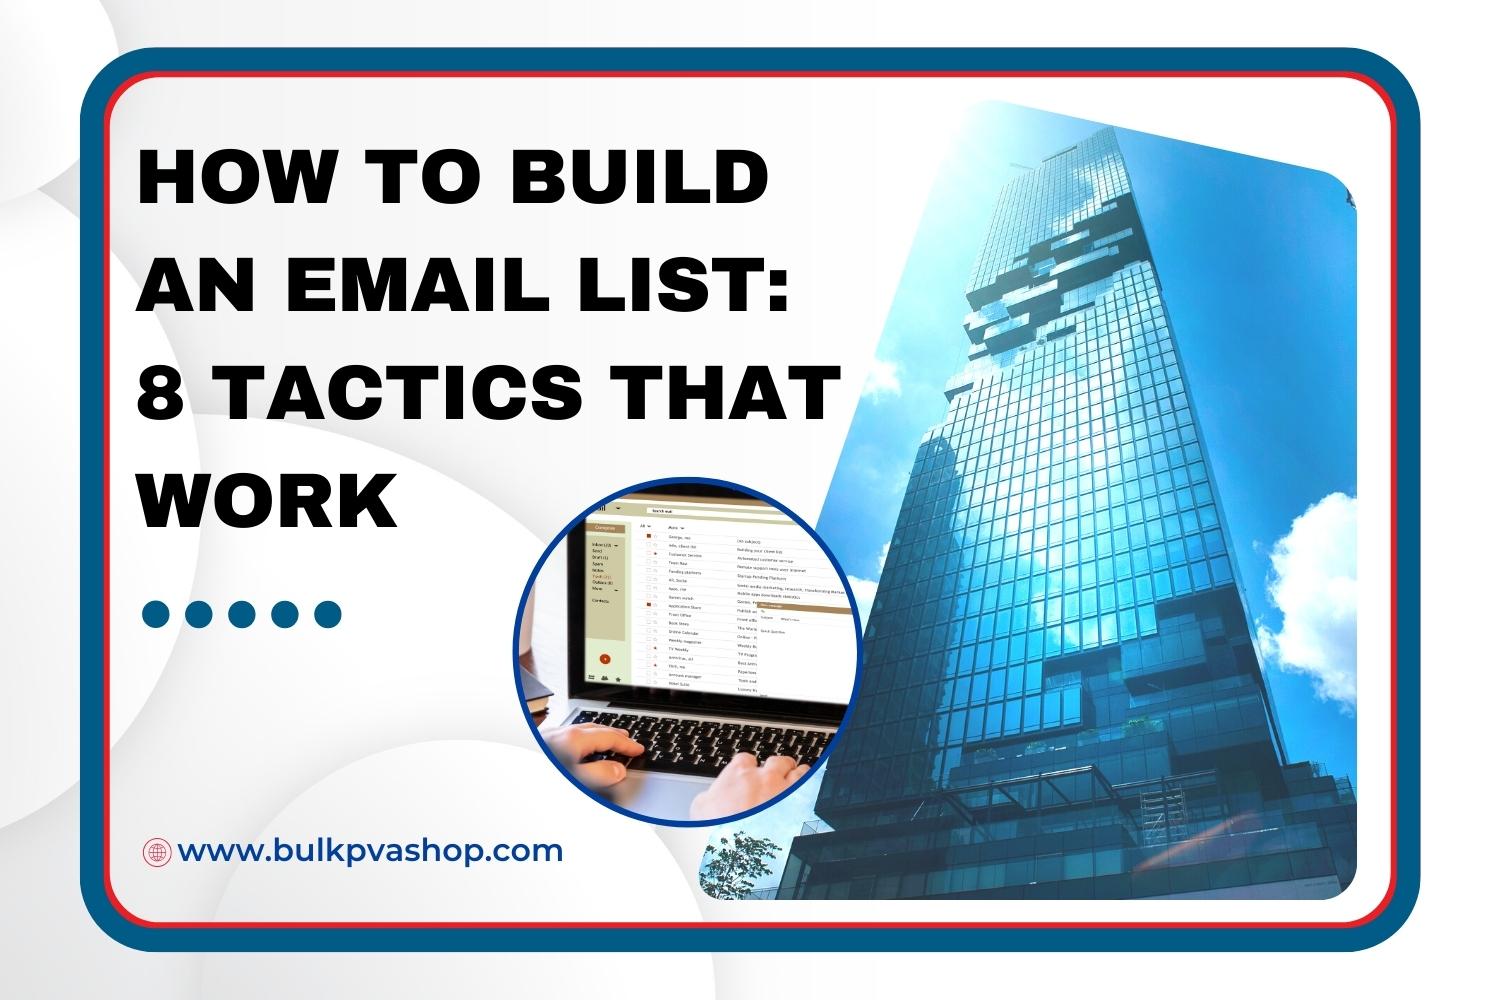 How to Build an Email List: 8 Tactics That Work